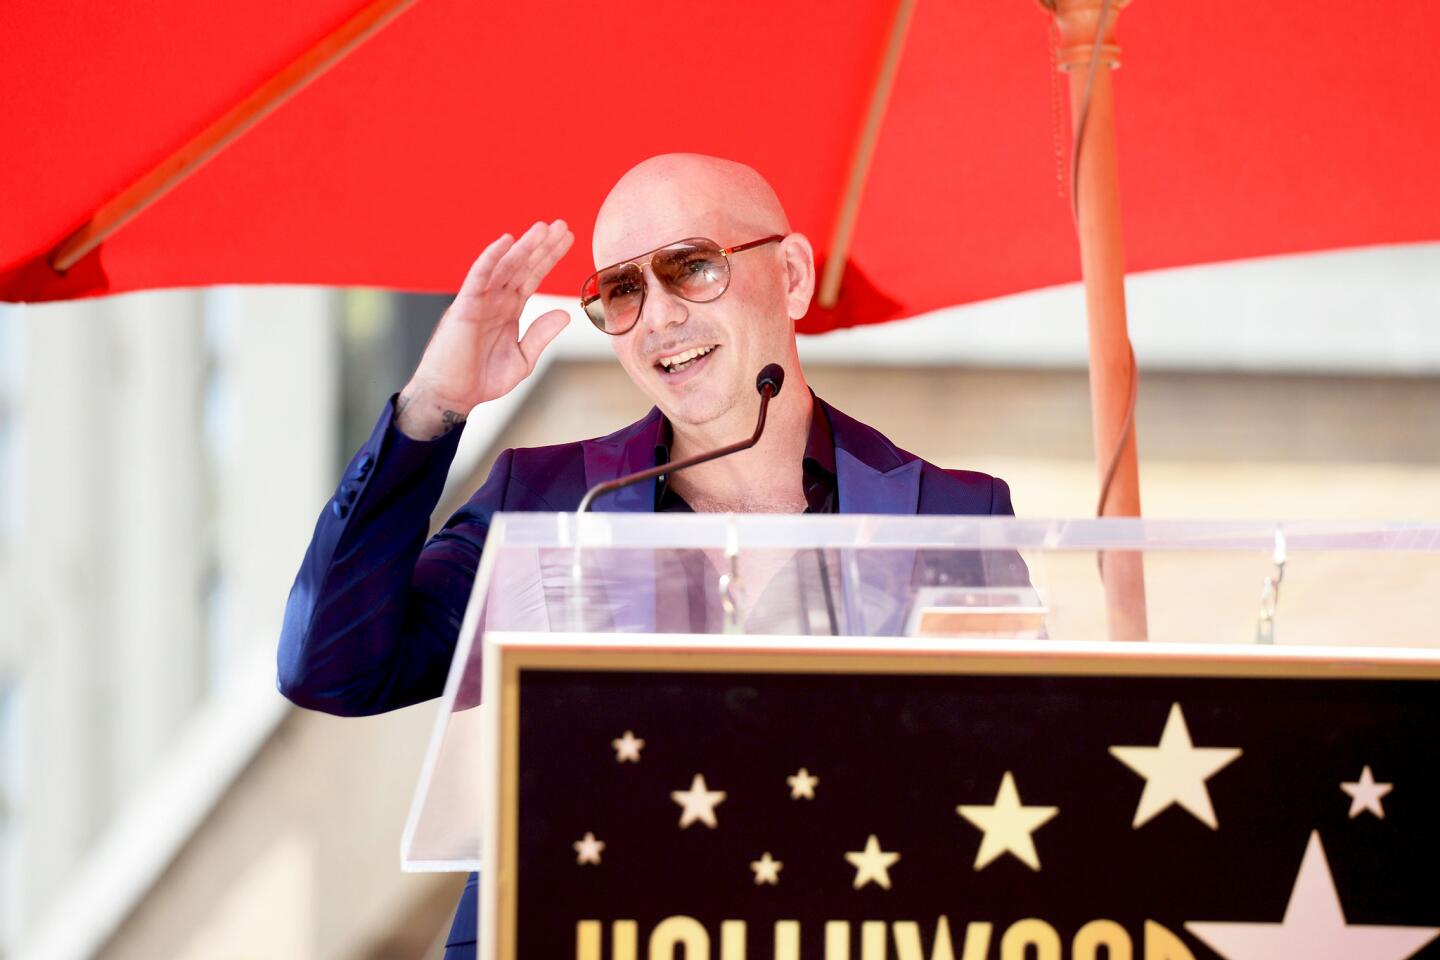 Pitbull Honored With Star On The Hollywood Walk Of Fame